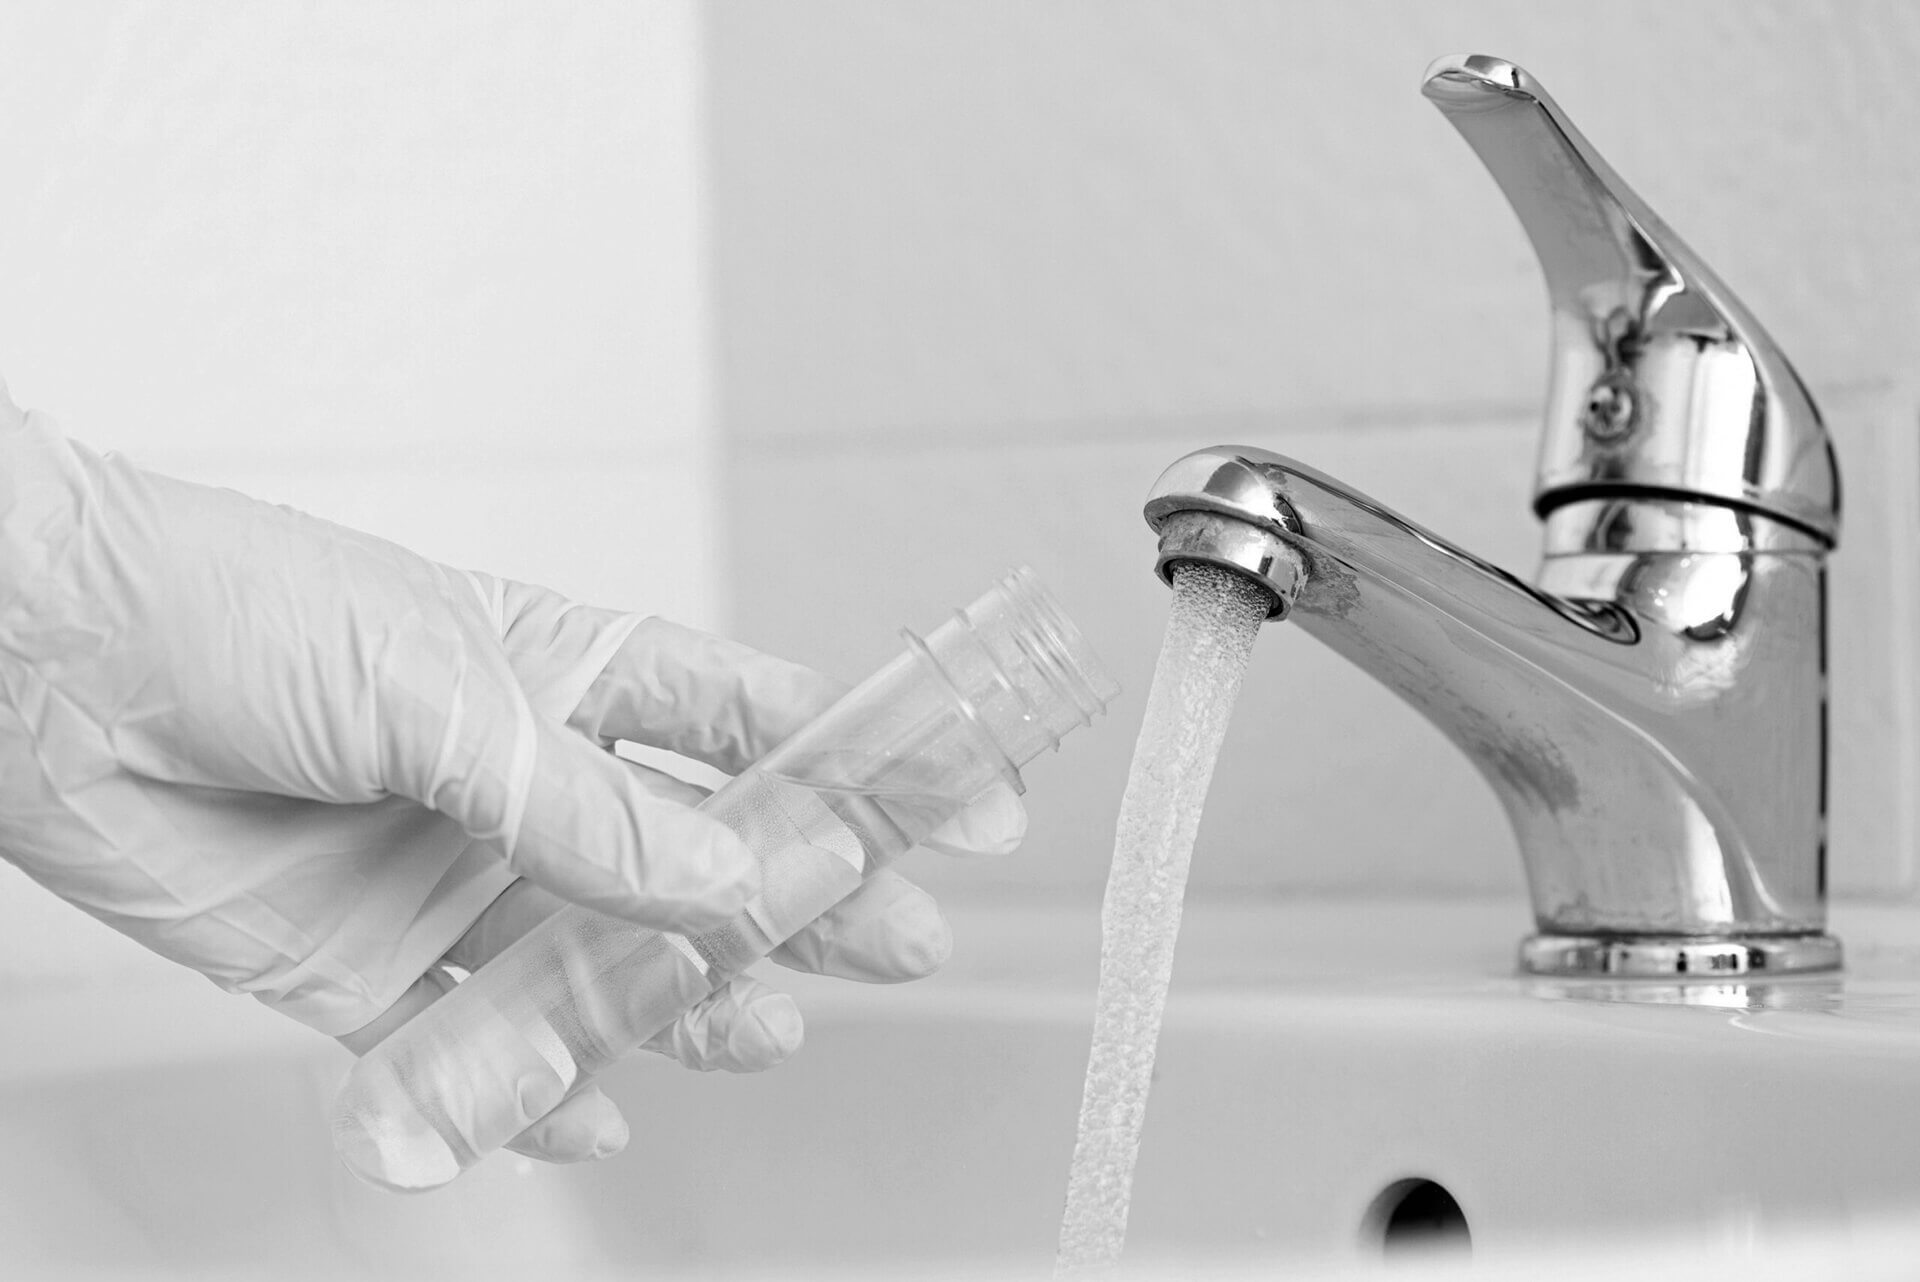 Tap water analysis quality control concept. Hand with a flask an